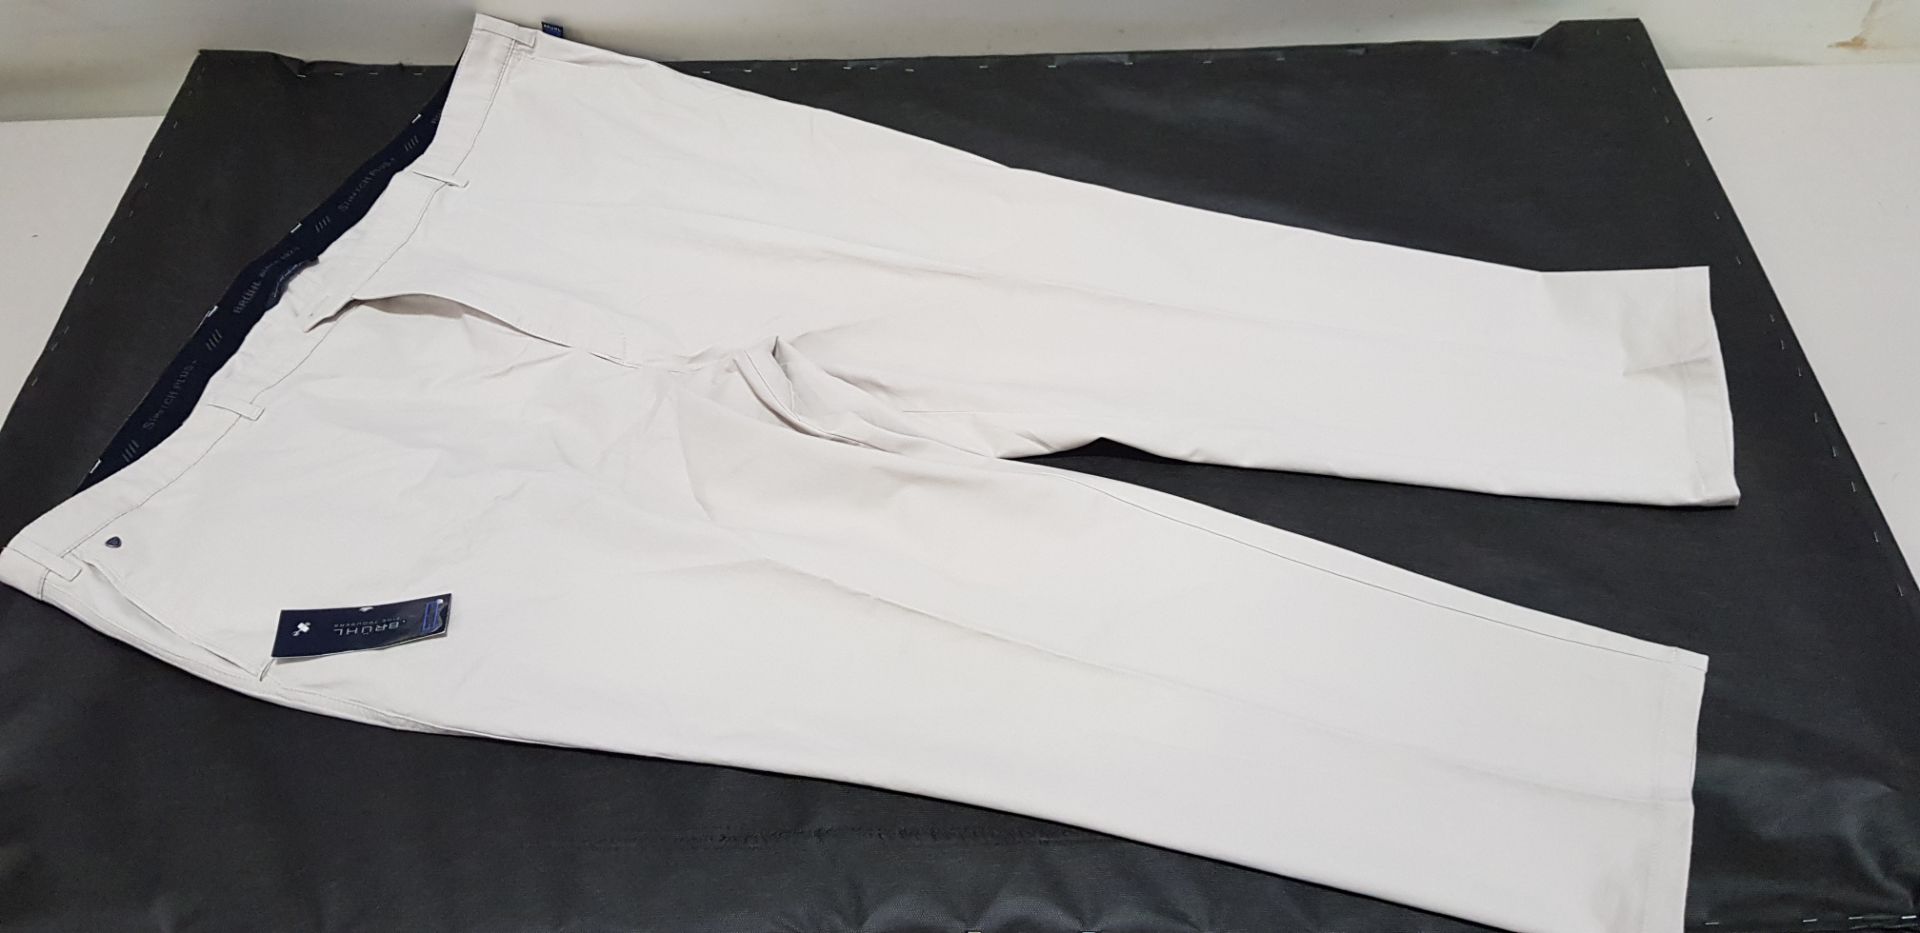 11 X BRAND NEW BRUHL FINE TROUSERS IN STONE COLOUR UK SIZE 46L RRP-£89.99 TOTAL RRP-£989.89